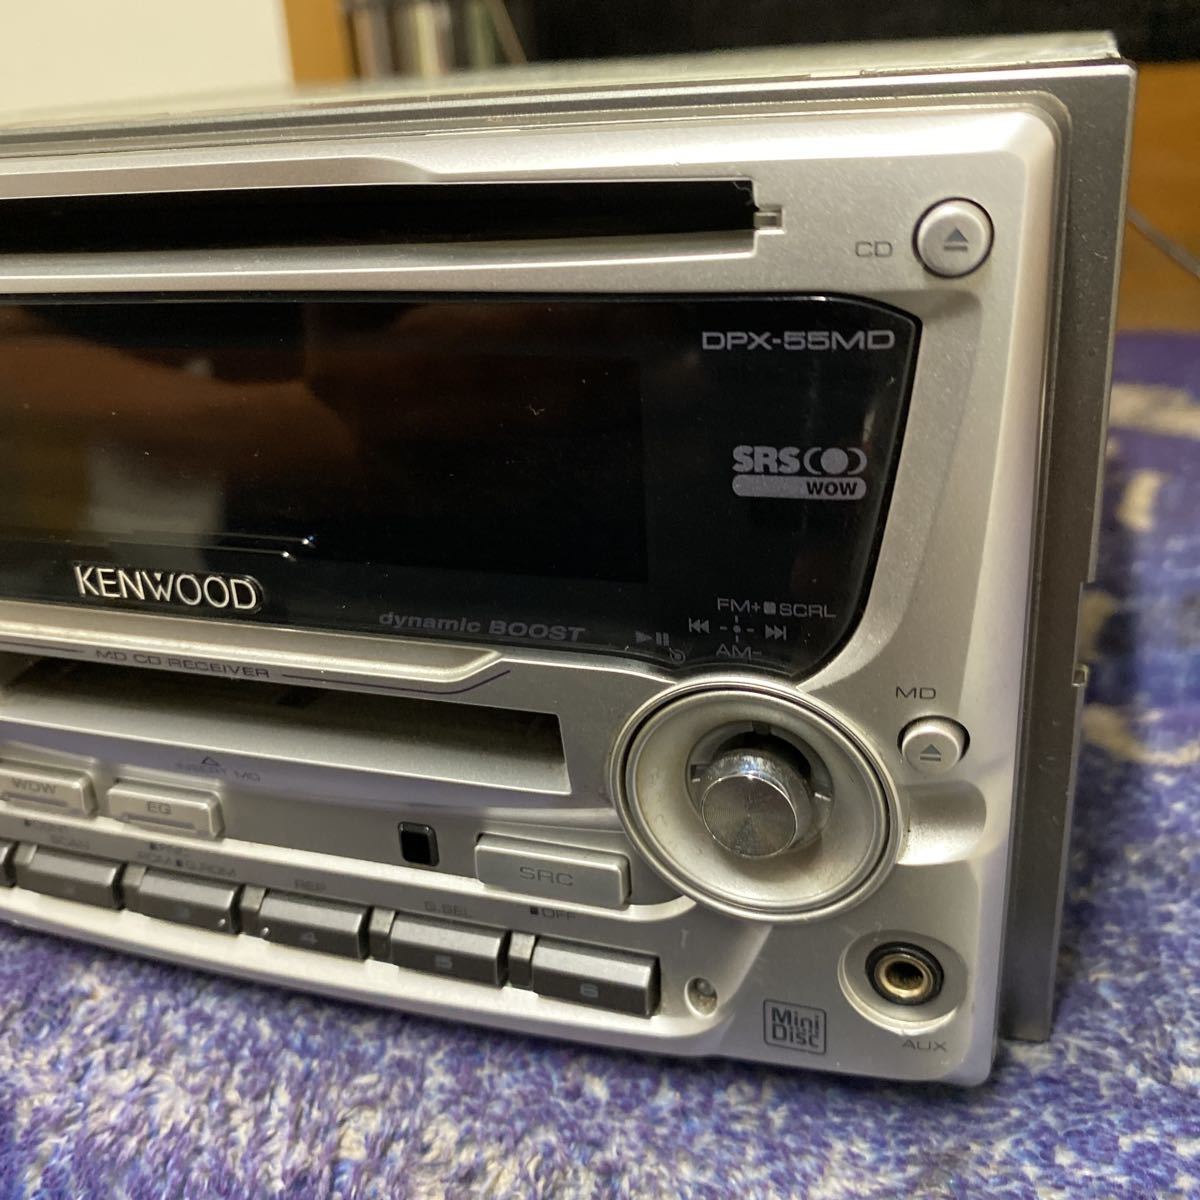 KENWOOD CD/MD плеер DPX-55MD